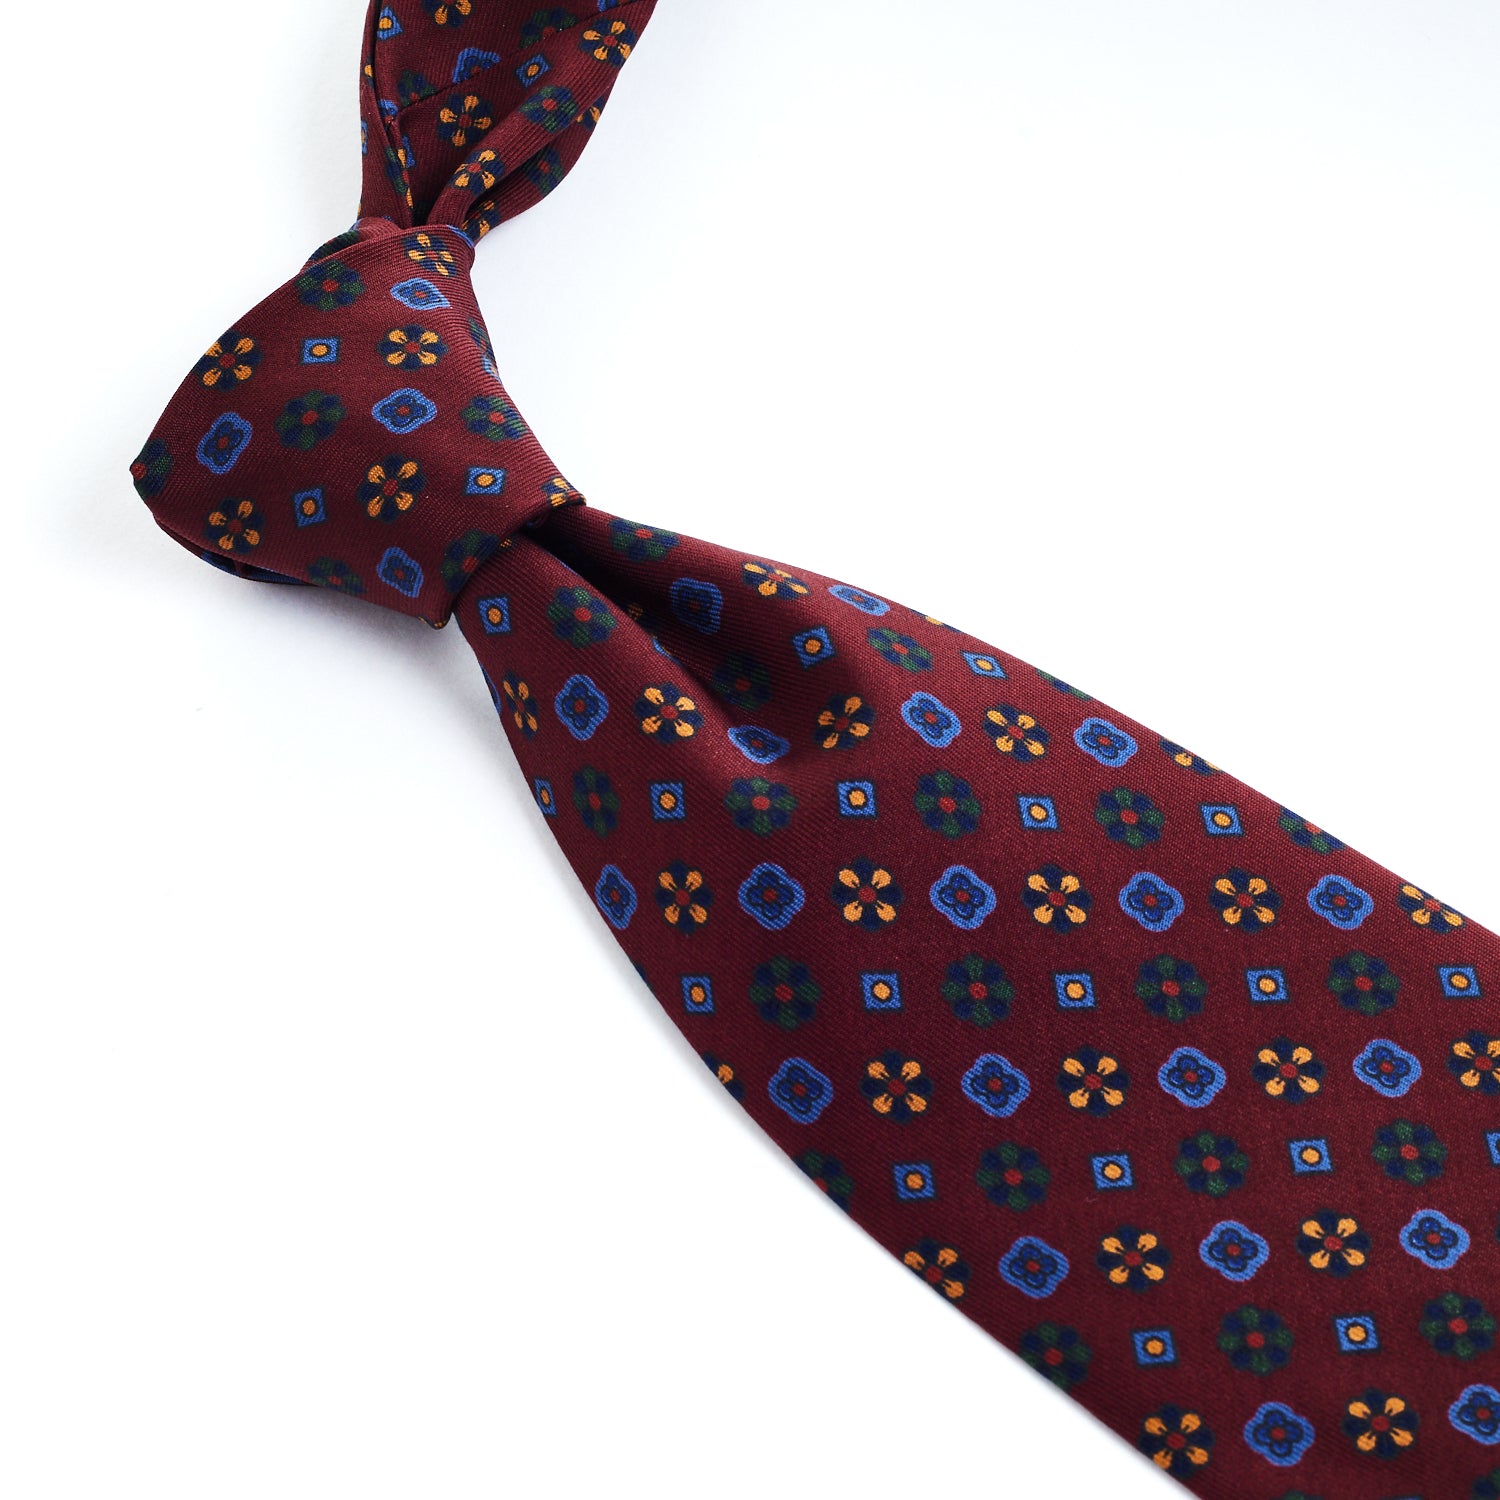 A Sovereign Grade Rust Mixed Floret Ancient Madder Tie crafted with exceptional KirbyAllison.com craftsmanship.